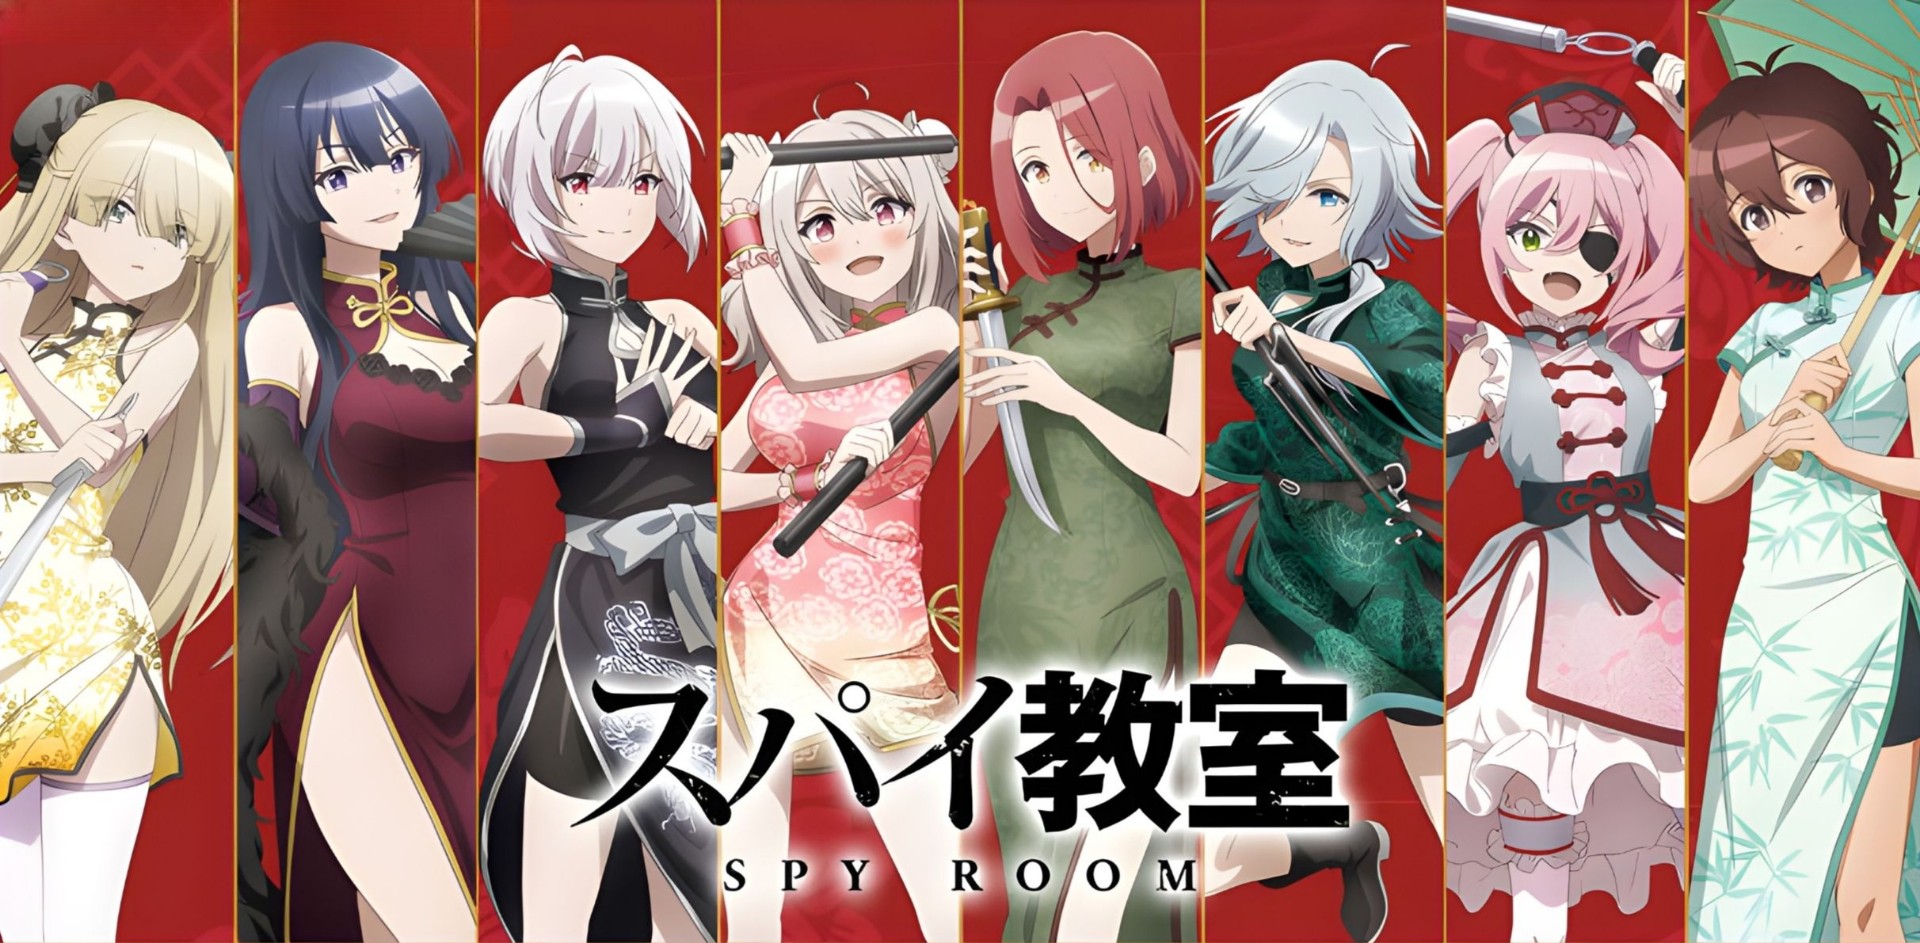 𝓡𝓲𝔁𝓲 🌺 on X: Spy Classroom online lottery (Chinese martial arts  theme) by DMM Scratch ⚔️ #スパイ教室 #spyroom #spyroom_anime #SpyClassroom  #SpyKyoushitsu #anime  / X